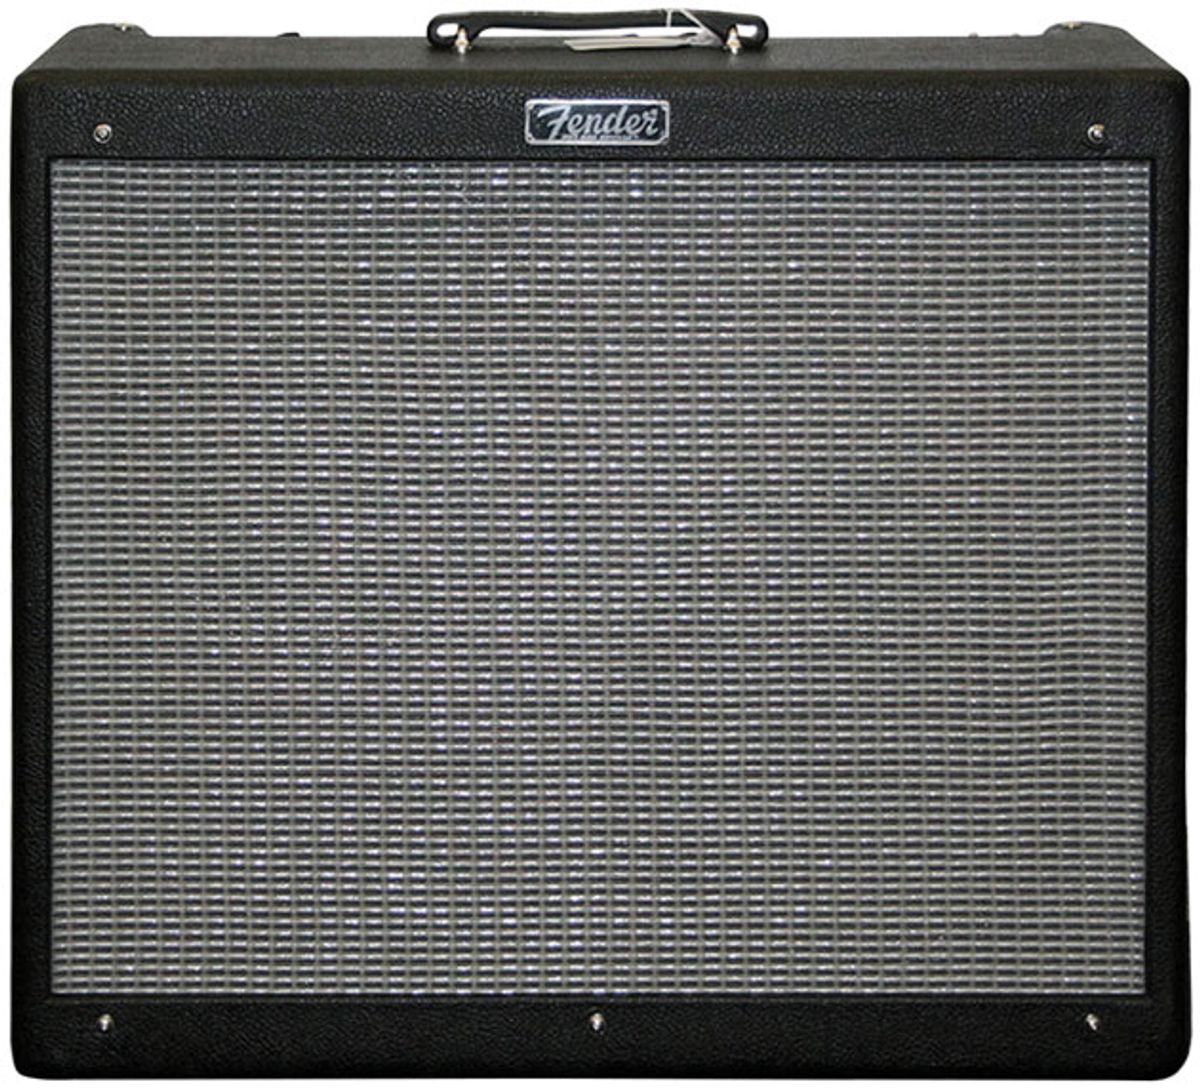 Ask Amp Man: Reducing the Bass on a Fender DeVille